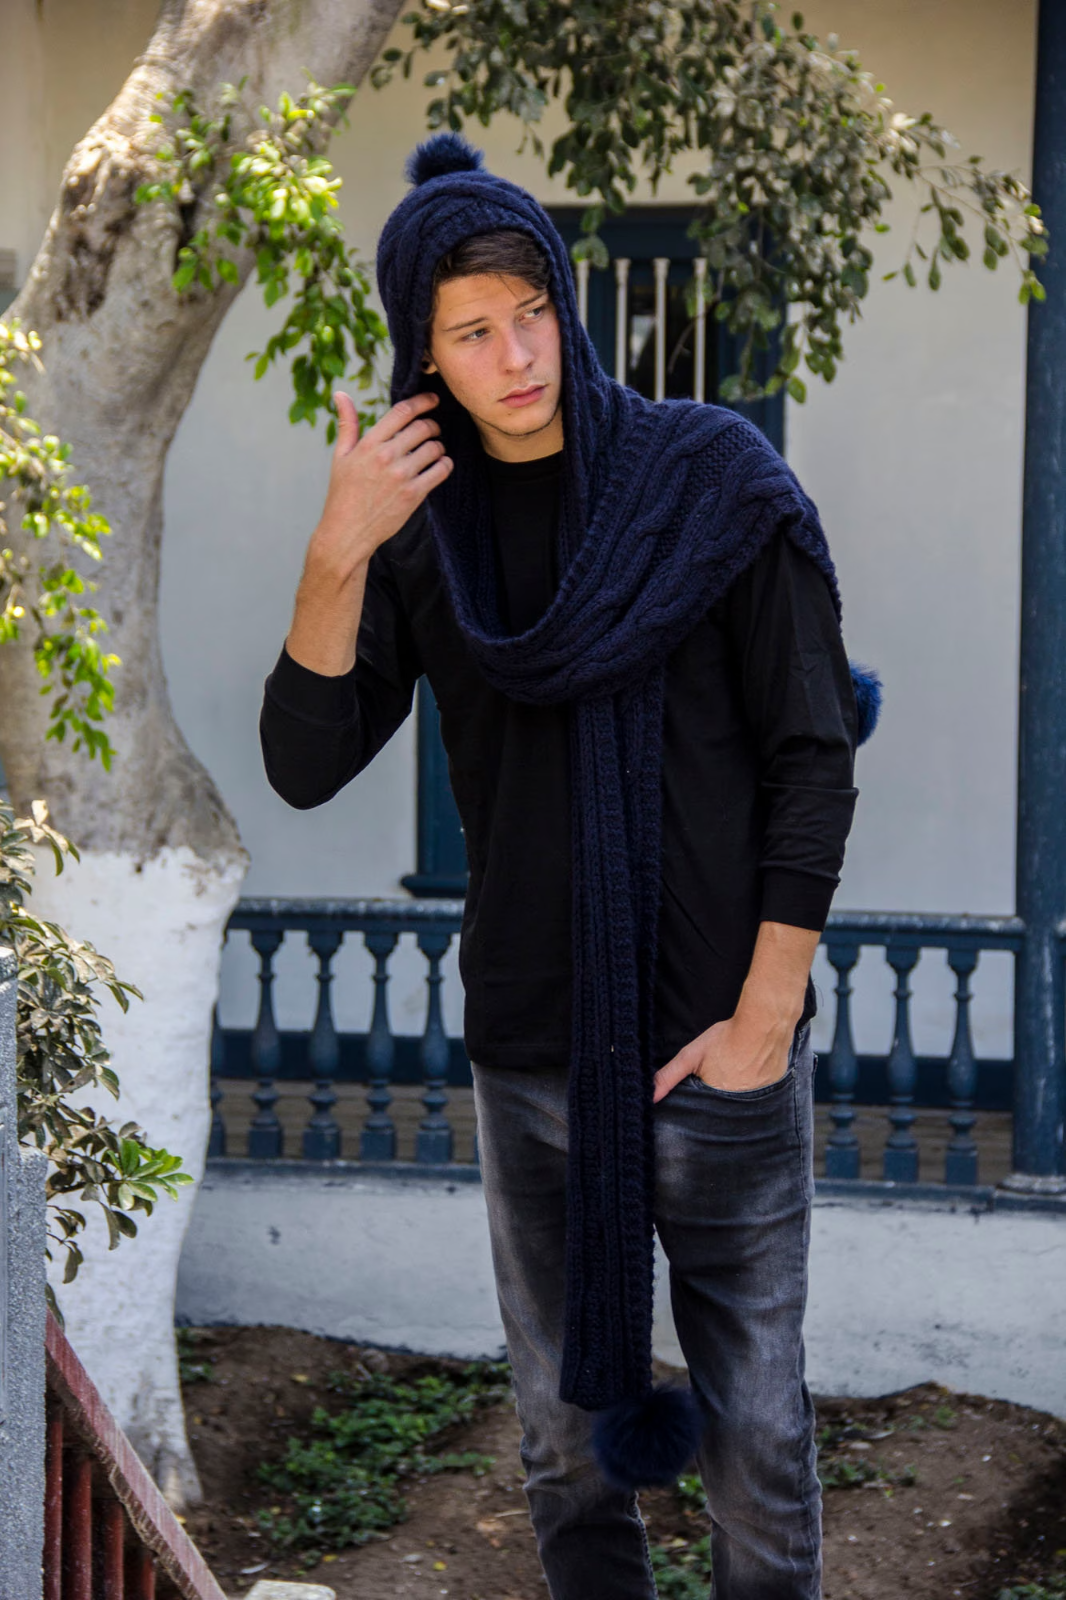 One Piece Long Baby Alpaca Blend Hooded Hat Scarf Women and Men - Navy Blue ARGUA